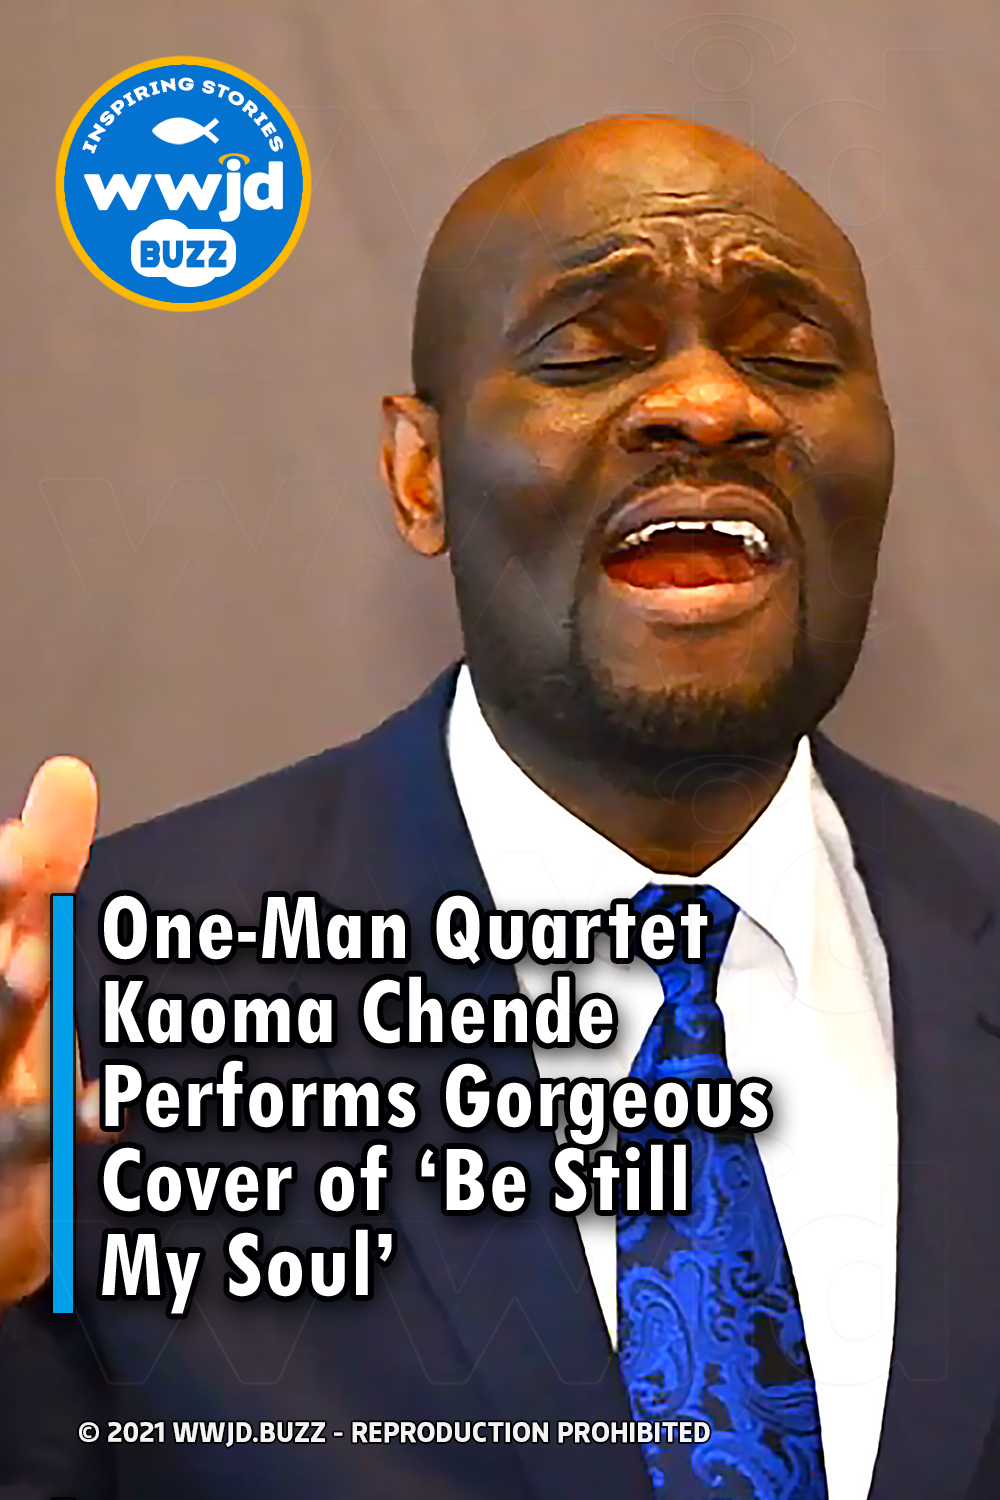 One-Man Quartet Kaoma Chende Performs Gorgeous Cover of ‘Be Still My Soul’